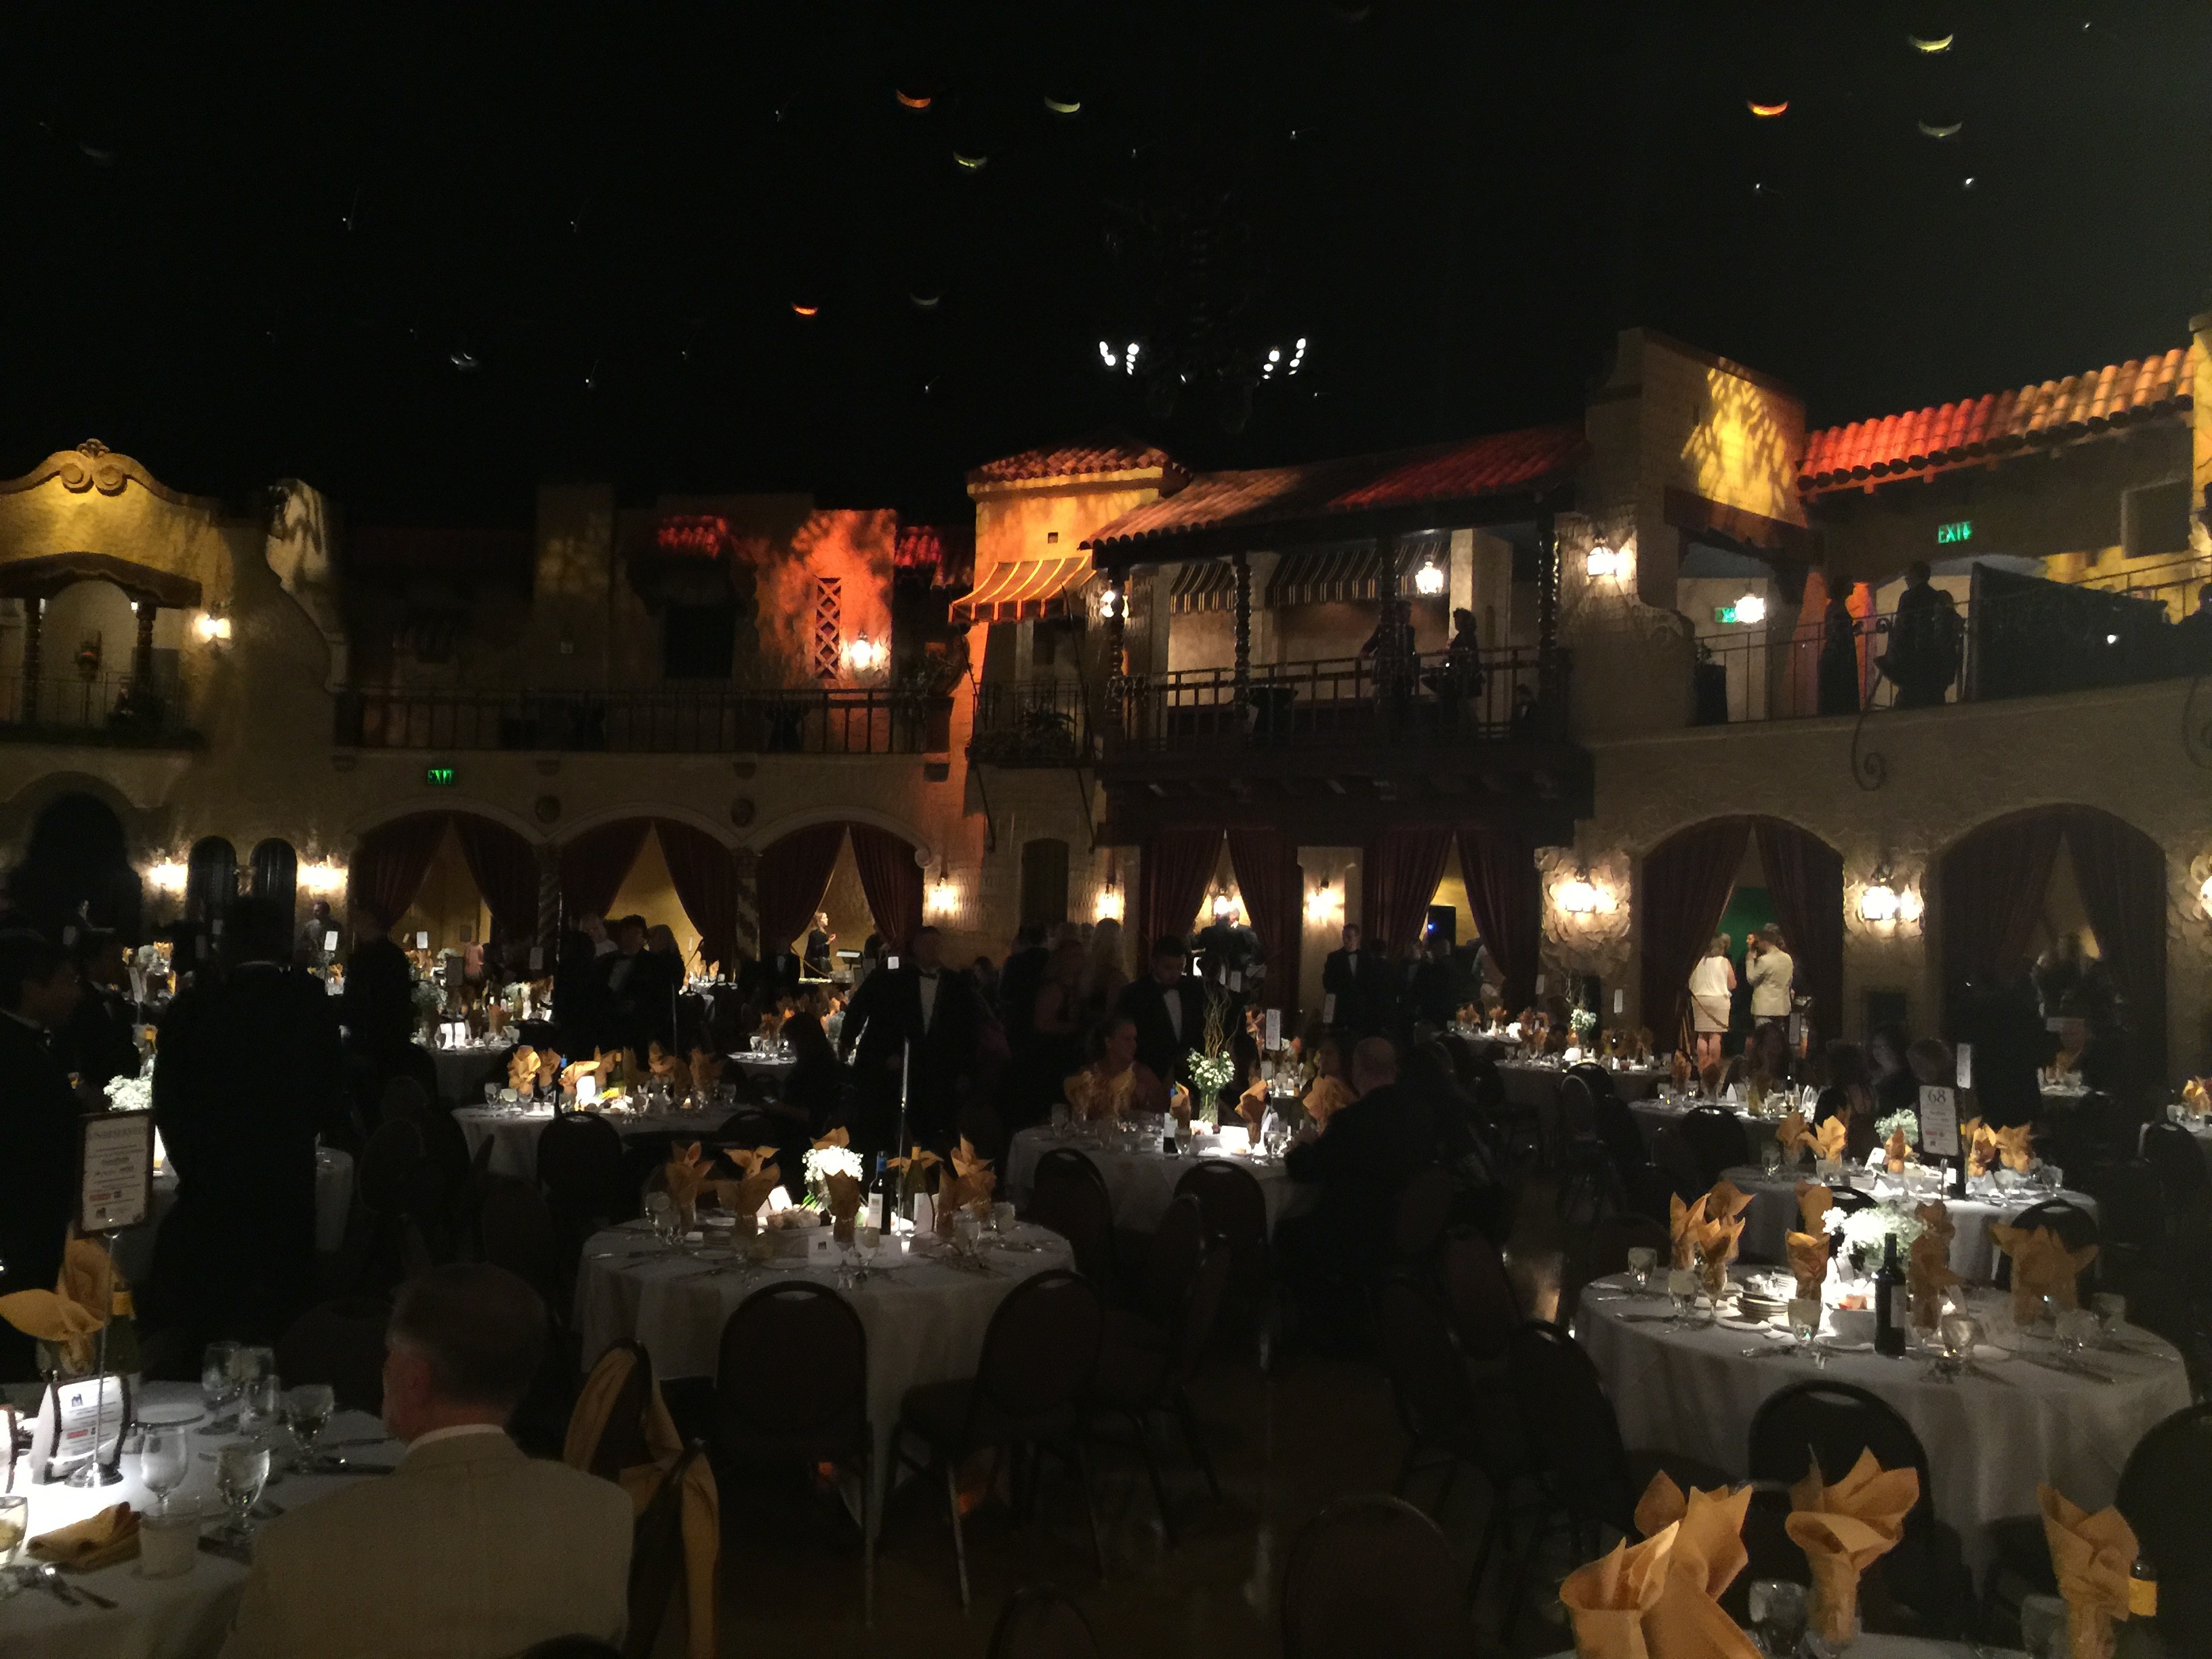 President's Dinner at the Indiana Roof Ballroom 2015